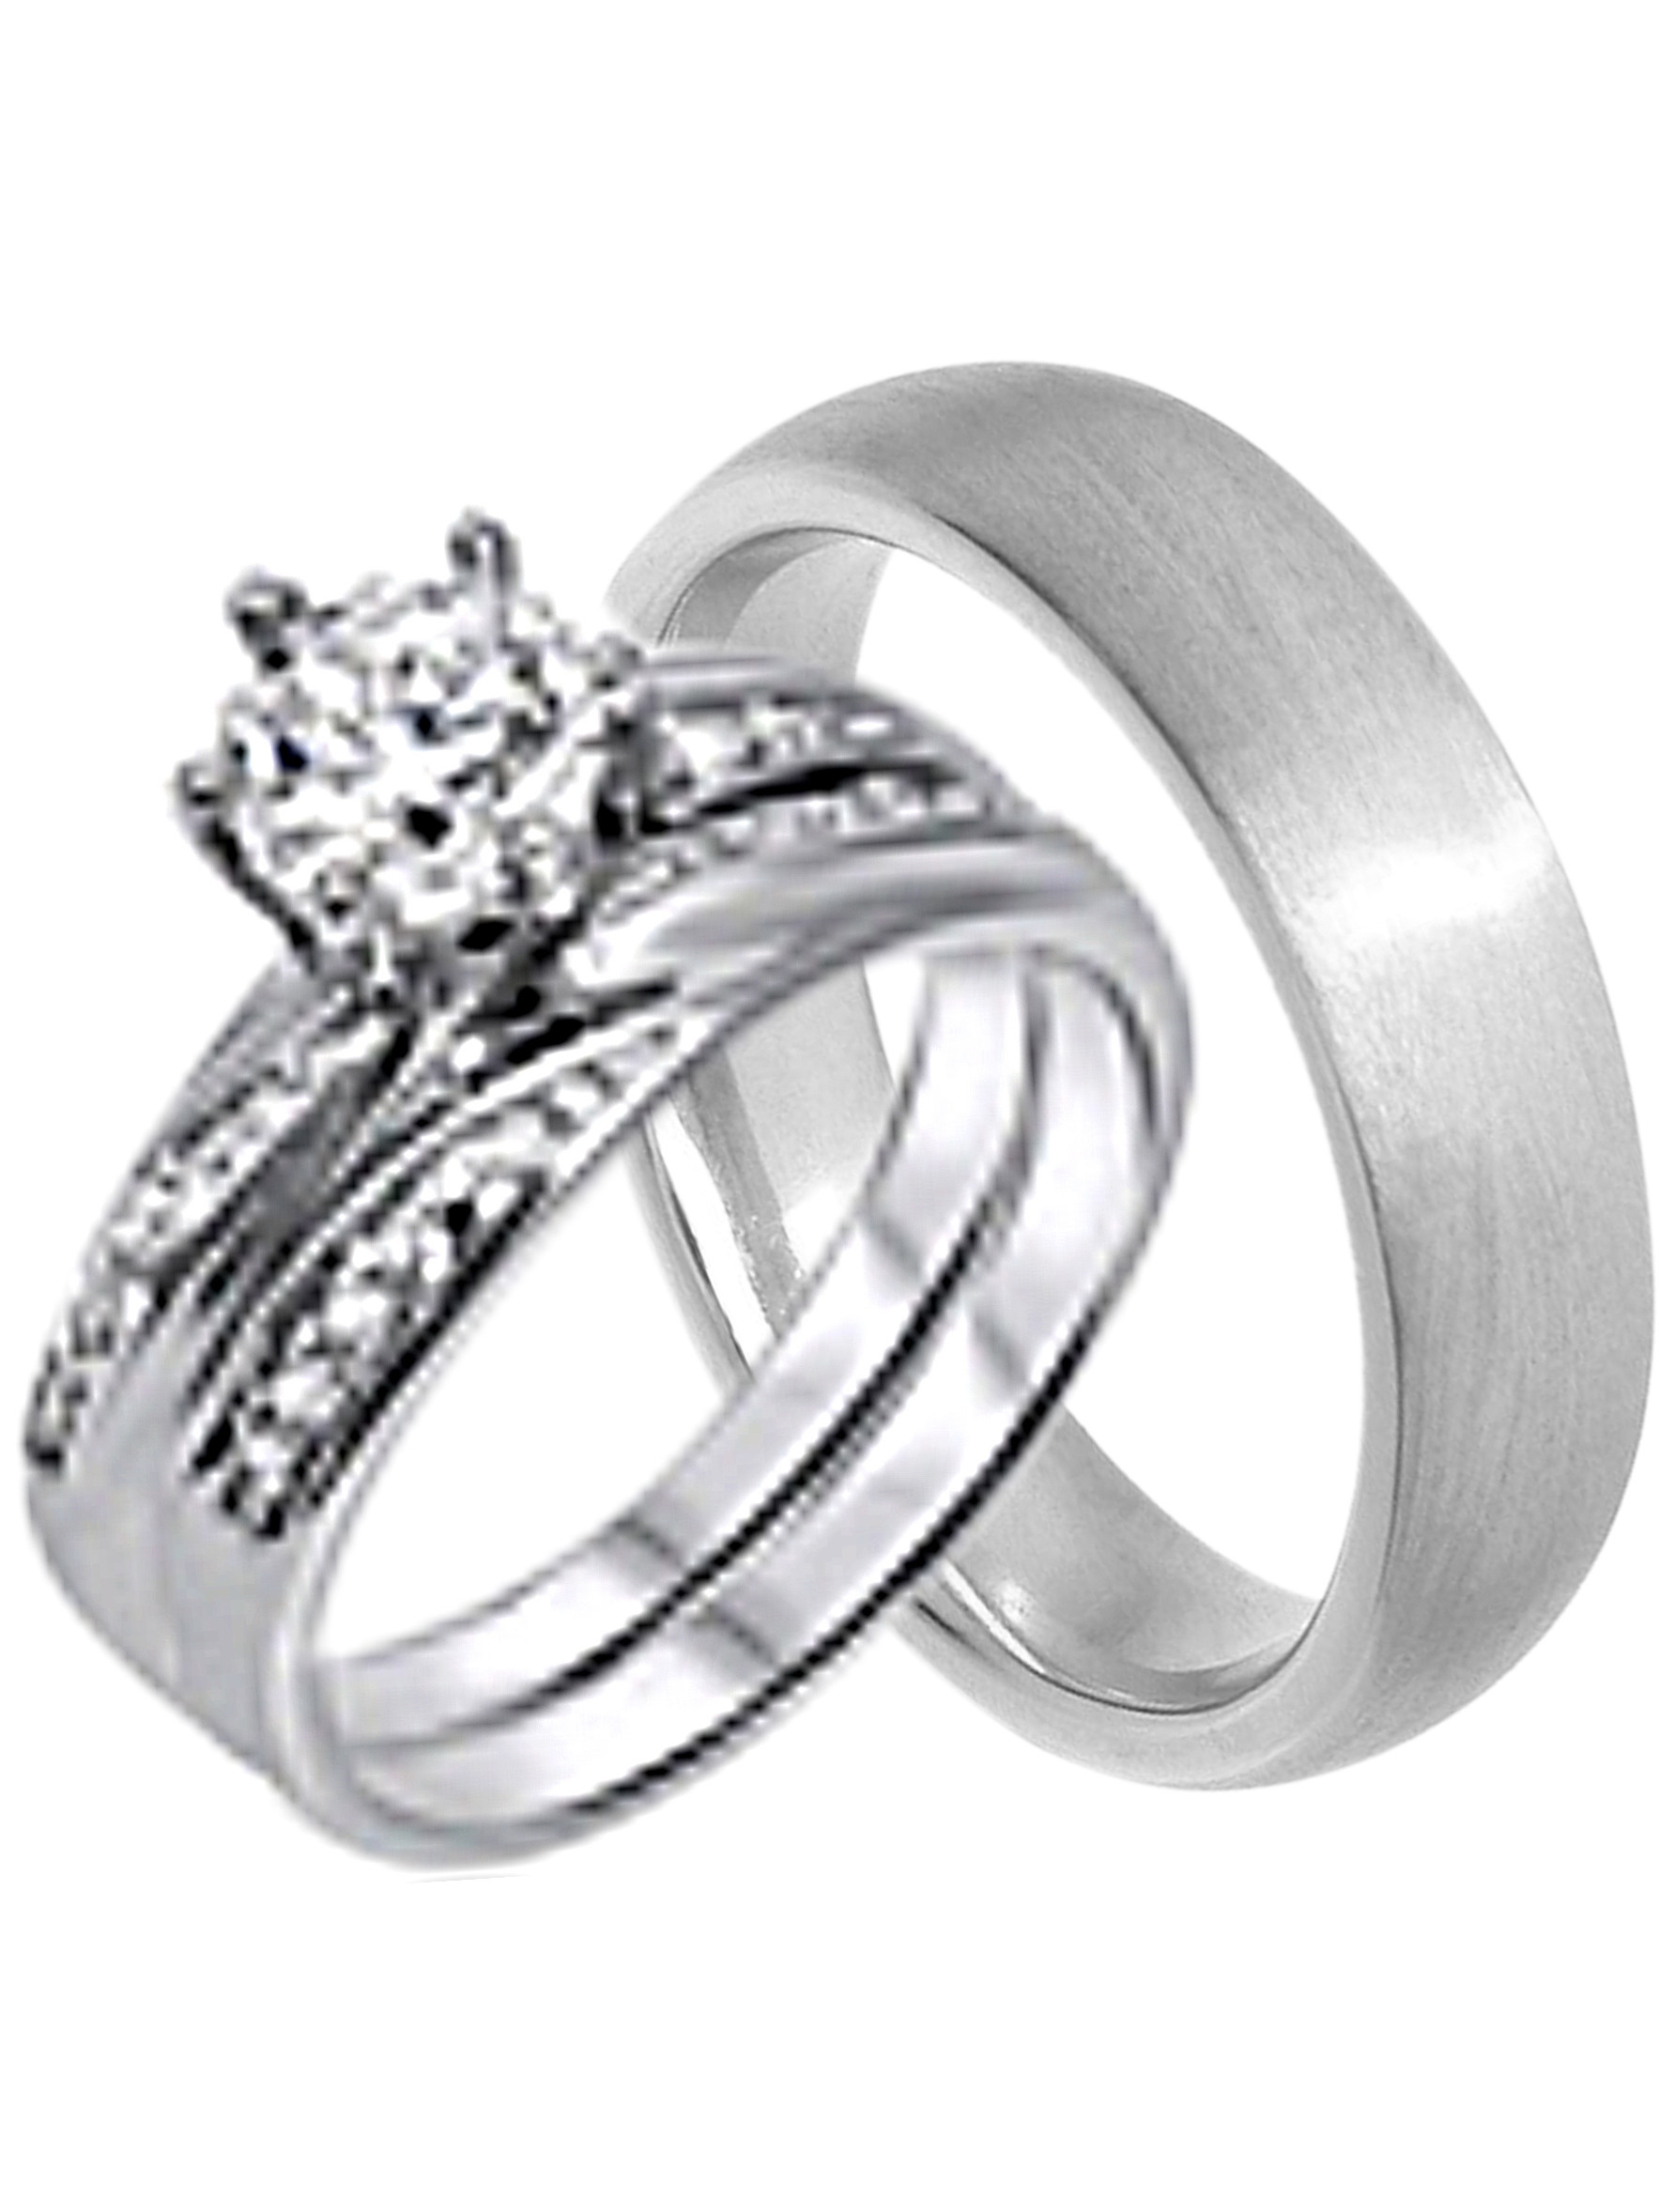 Wedding Rings Sets For Her
 His and Hers Wedding Ring Set Cheap Wedding Bands for Him